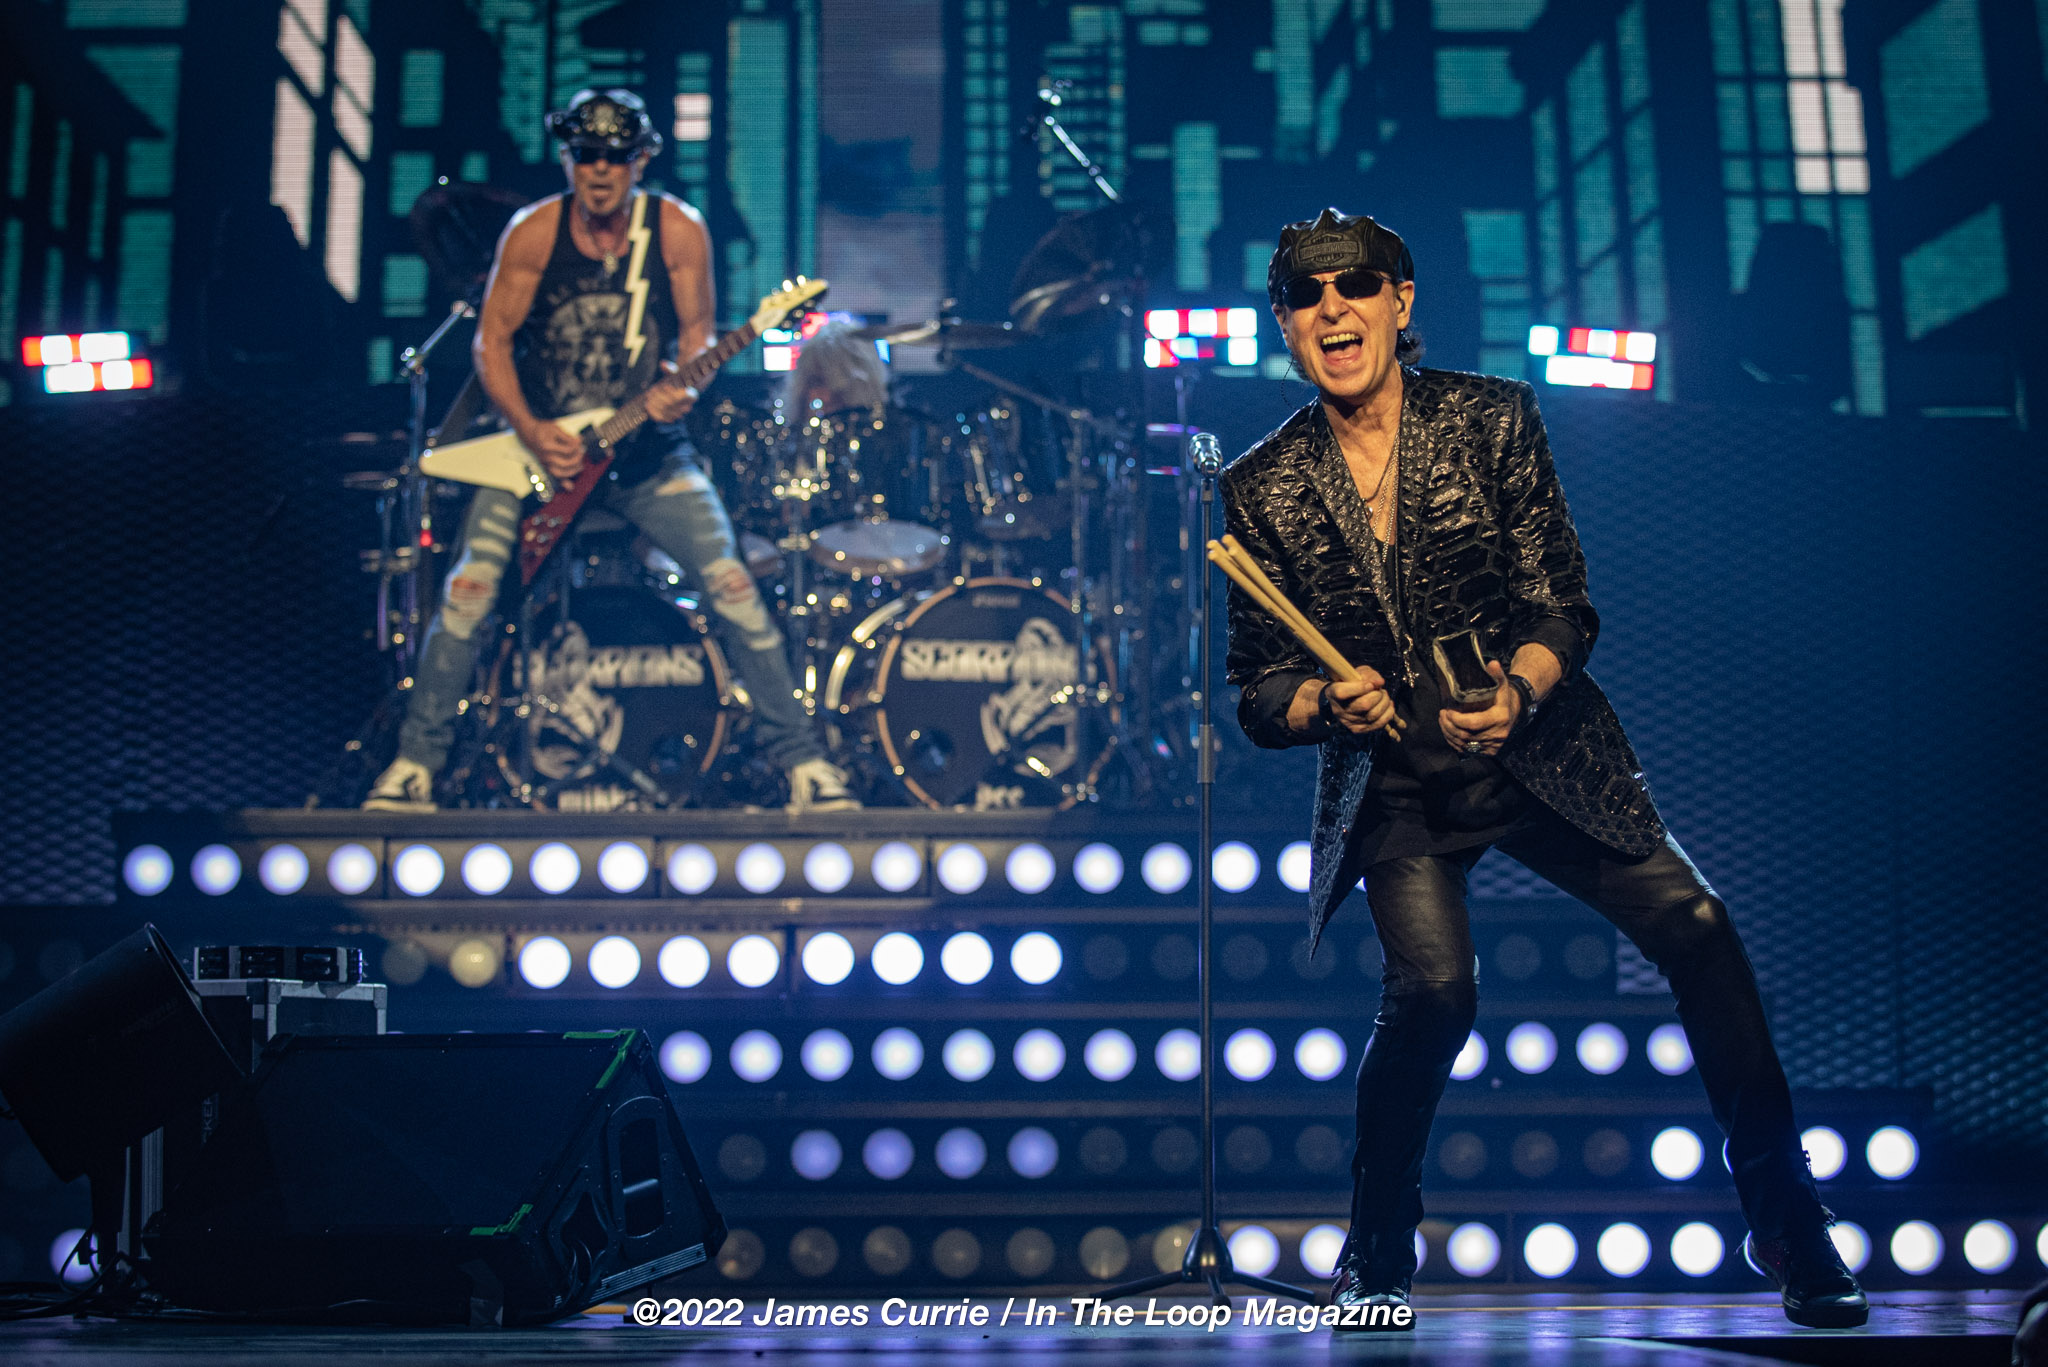 Live Review: Scorpions Sting Chicago With a Mix of Old and New